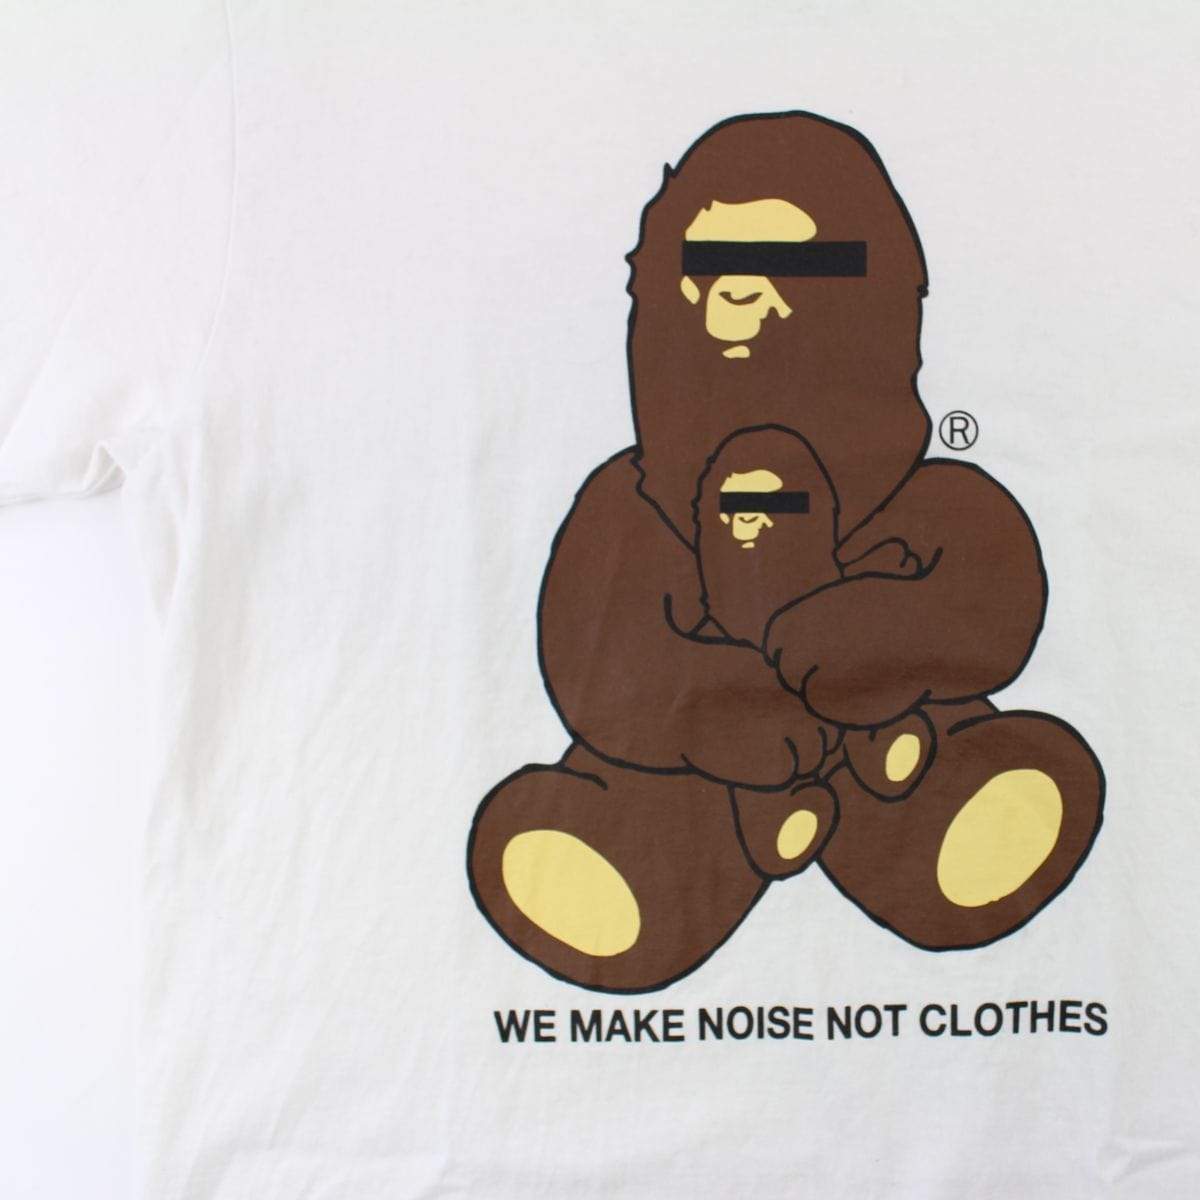 Bape We Make Noise Not Clothes Tee White - SaruGeneral